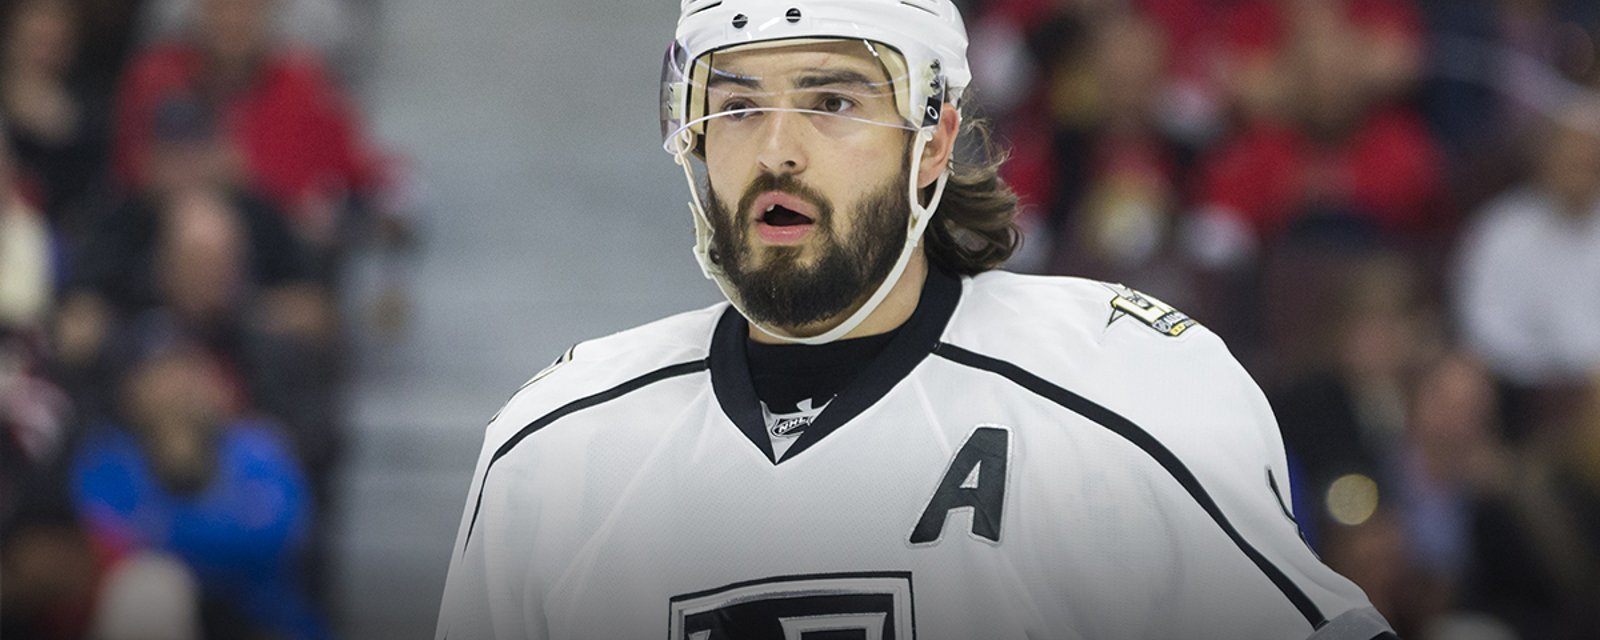 Star defenseman Drew Doughty makes a surprising declaration on his future with the Kings!